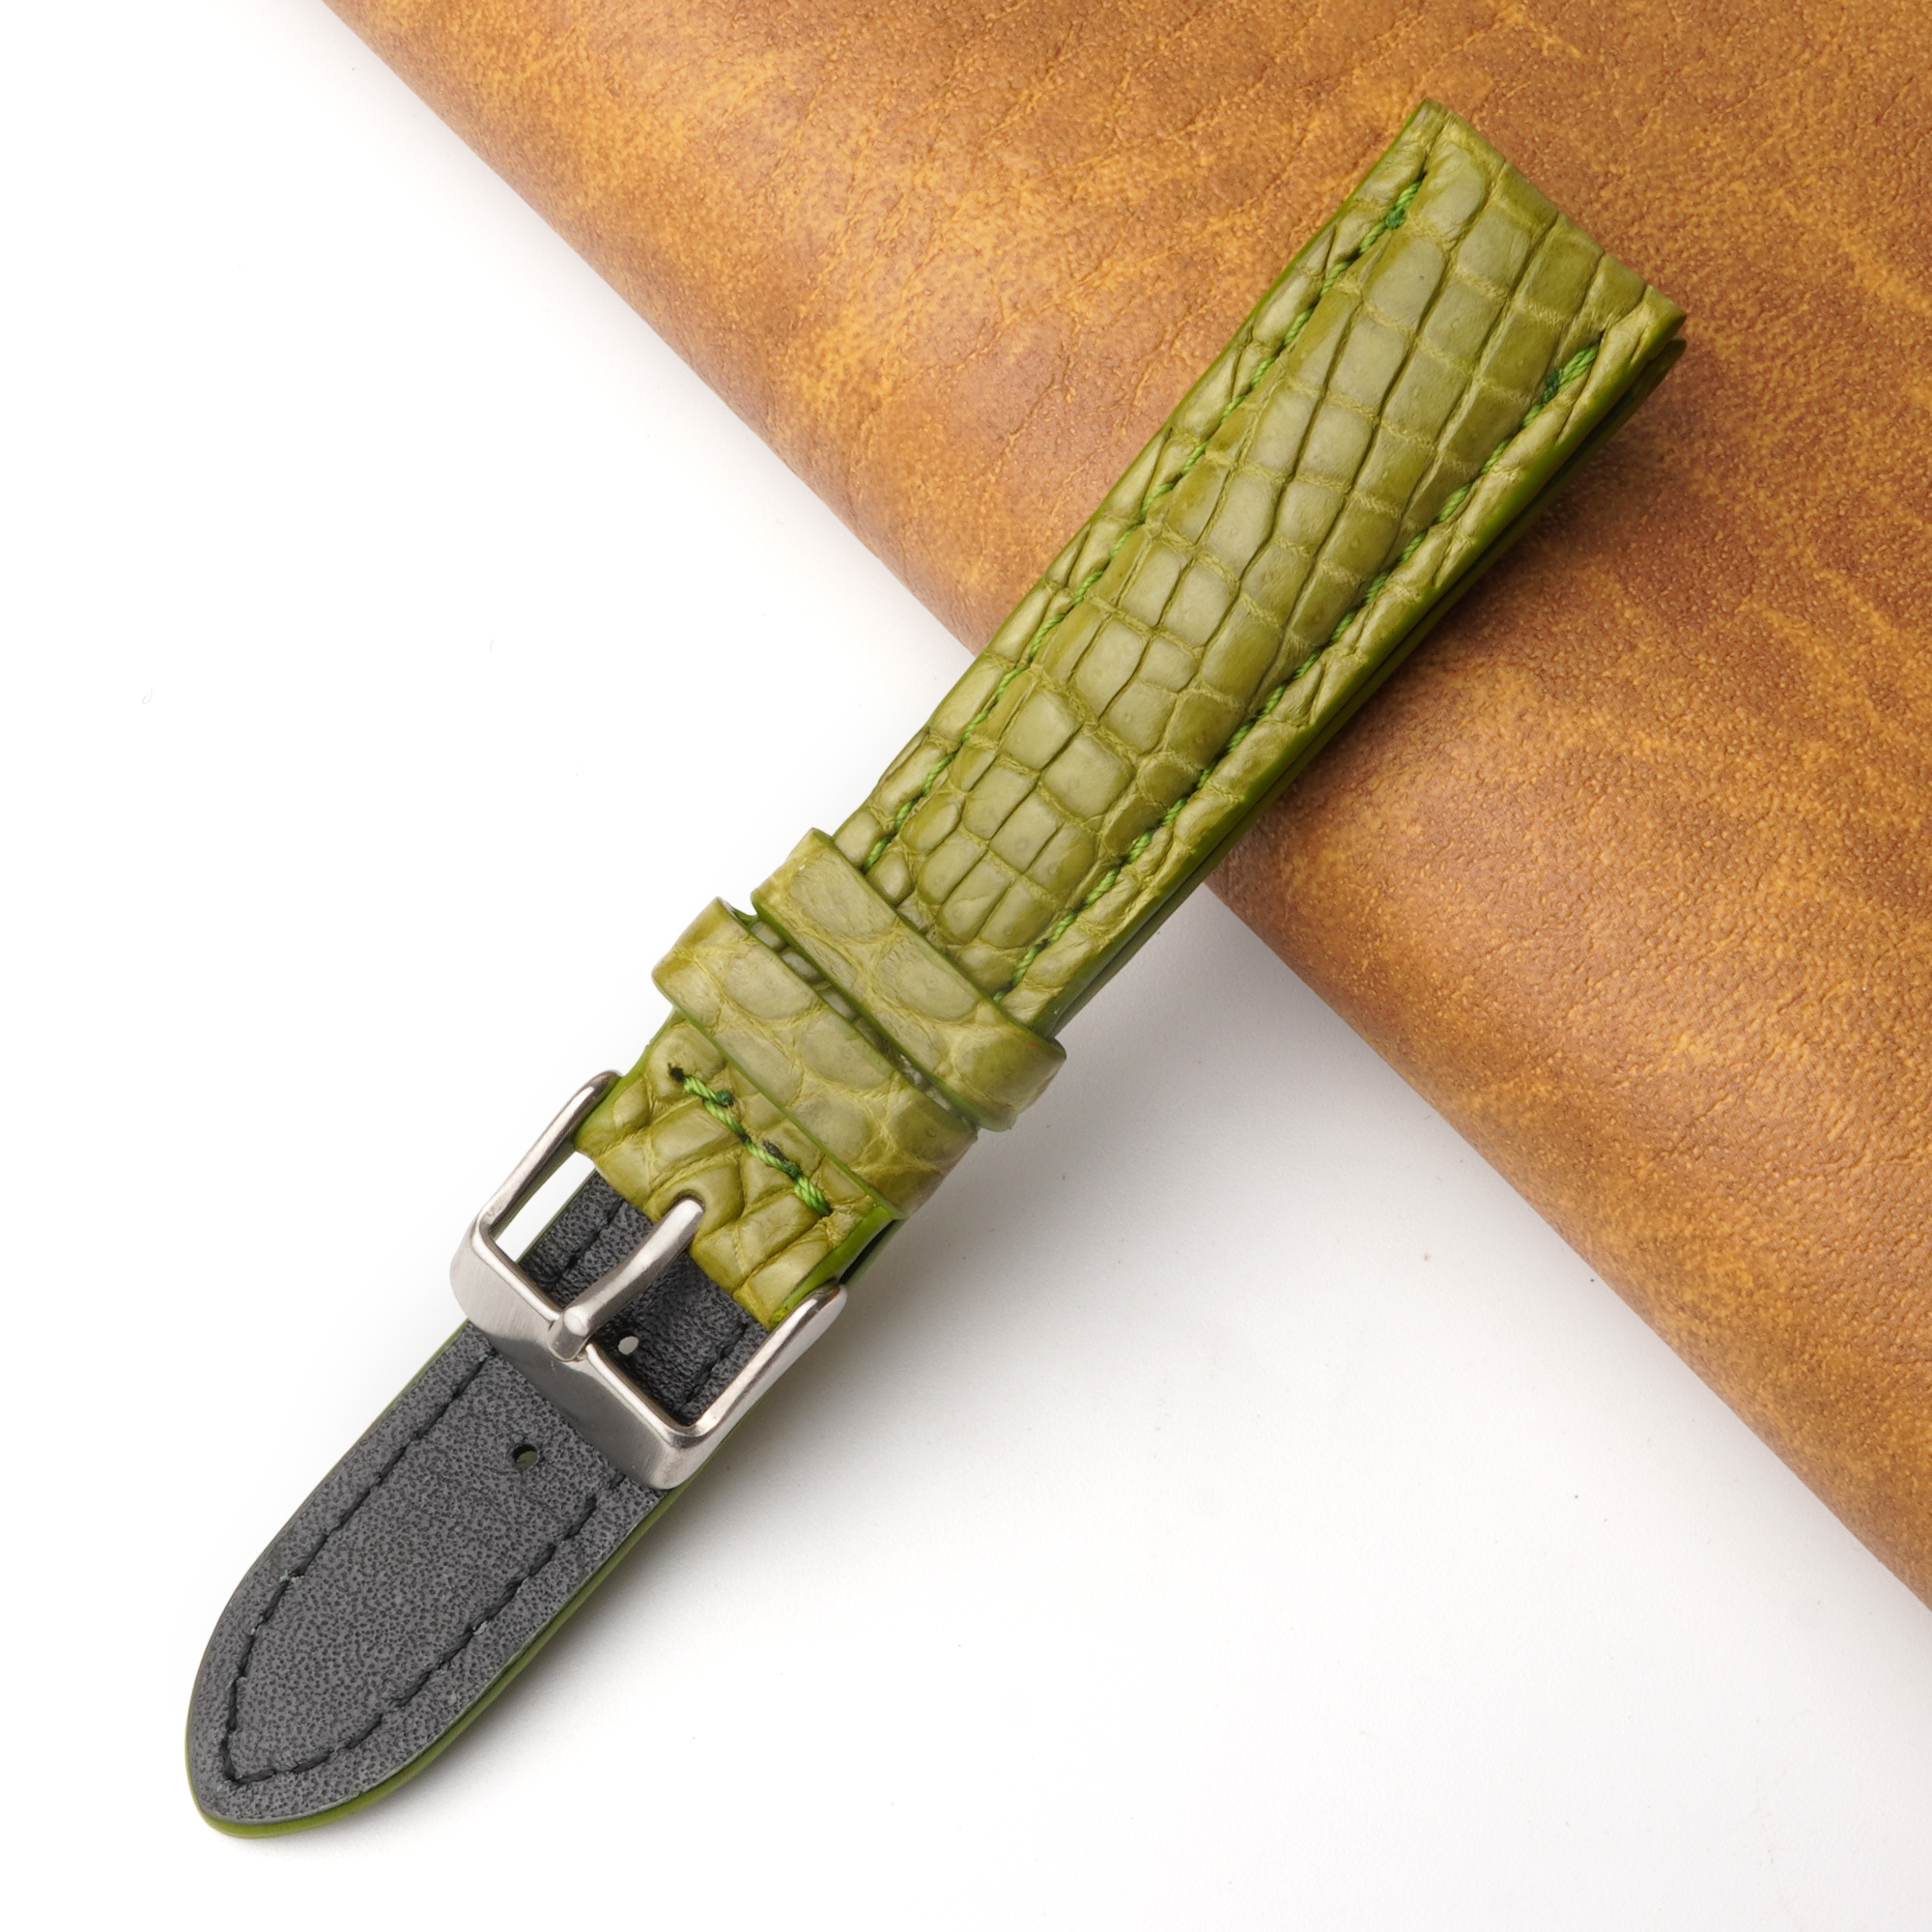 18mm Green Unique Pattern Alligator Leather Watch Band For Men DH-200E